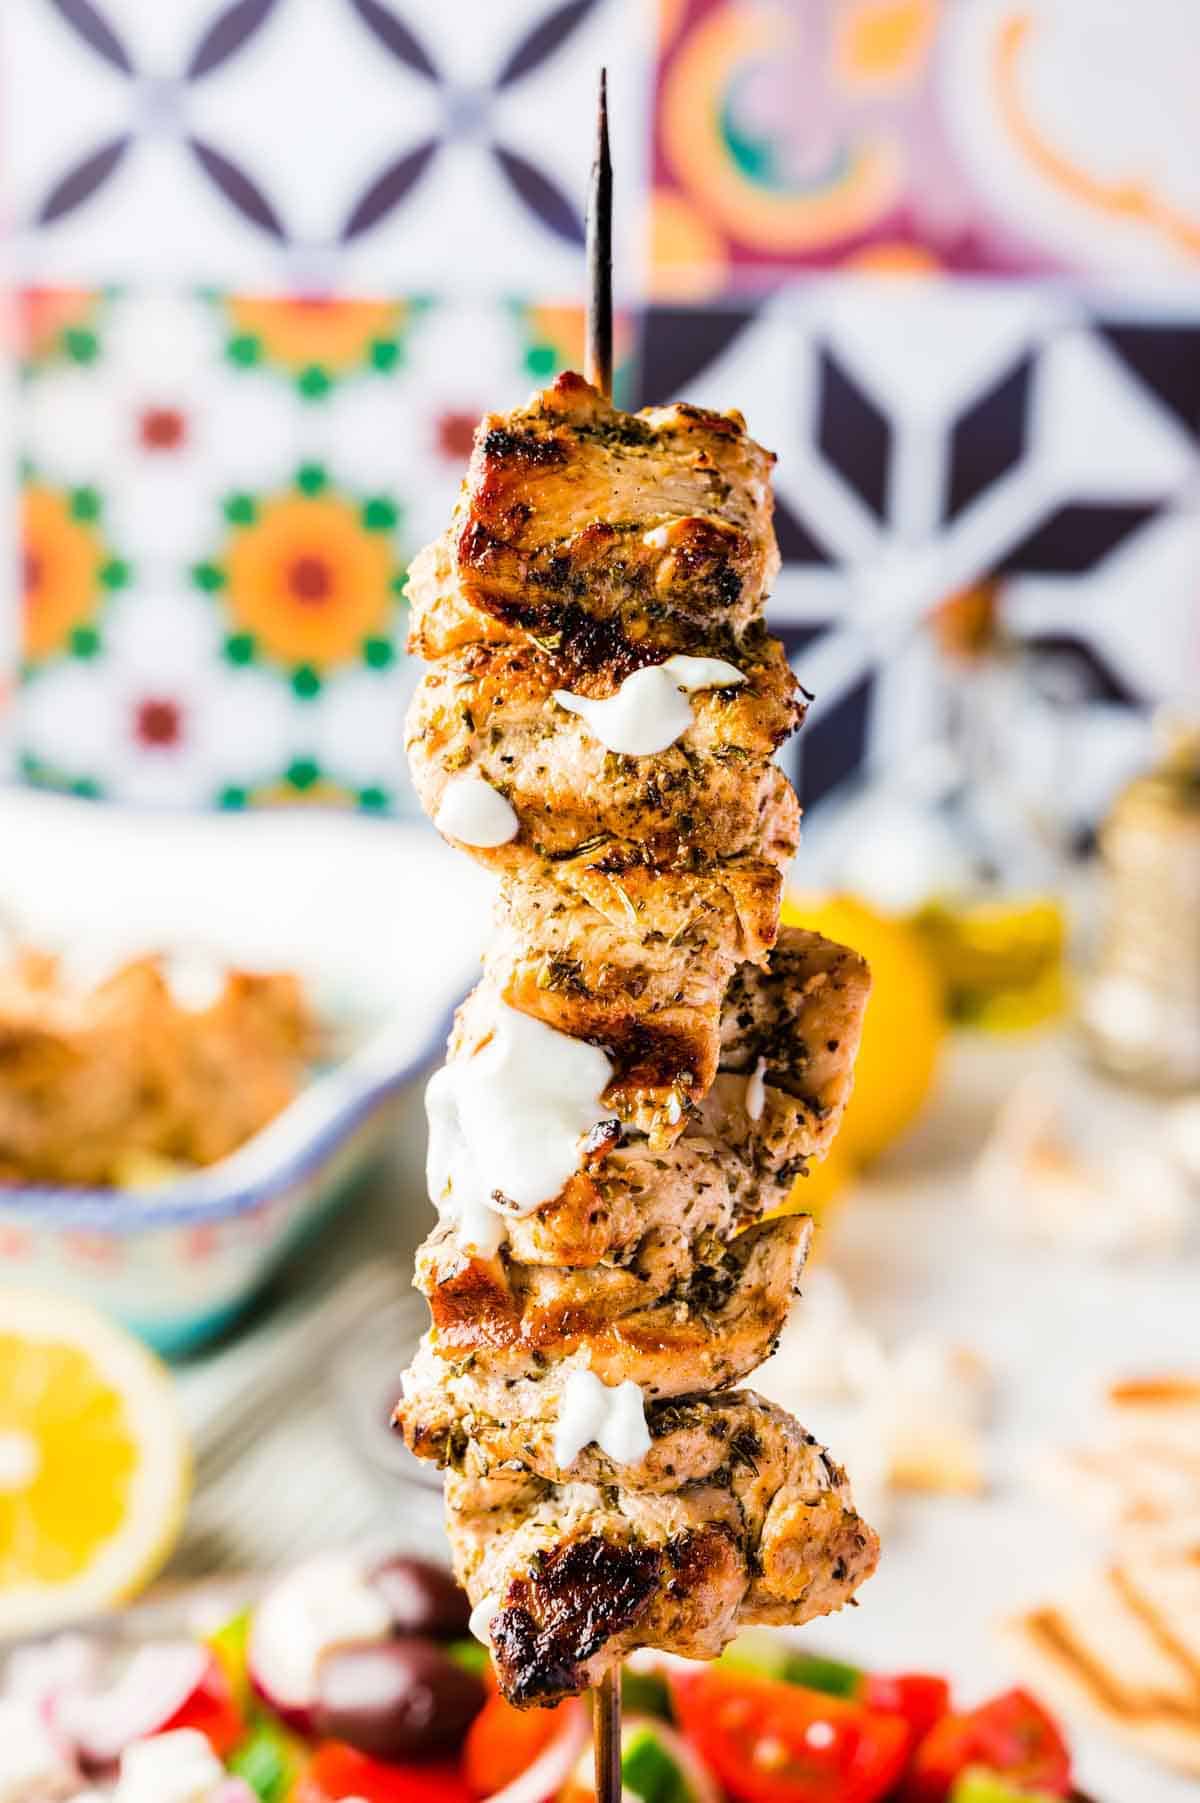 A Single Greek Chicken Skewer with Tzatziki Sauce Being Held in Front of a Colorful Wall